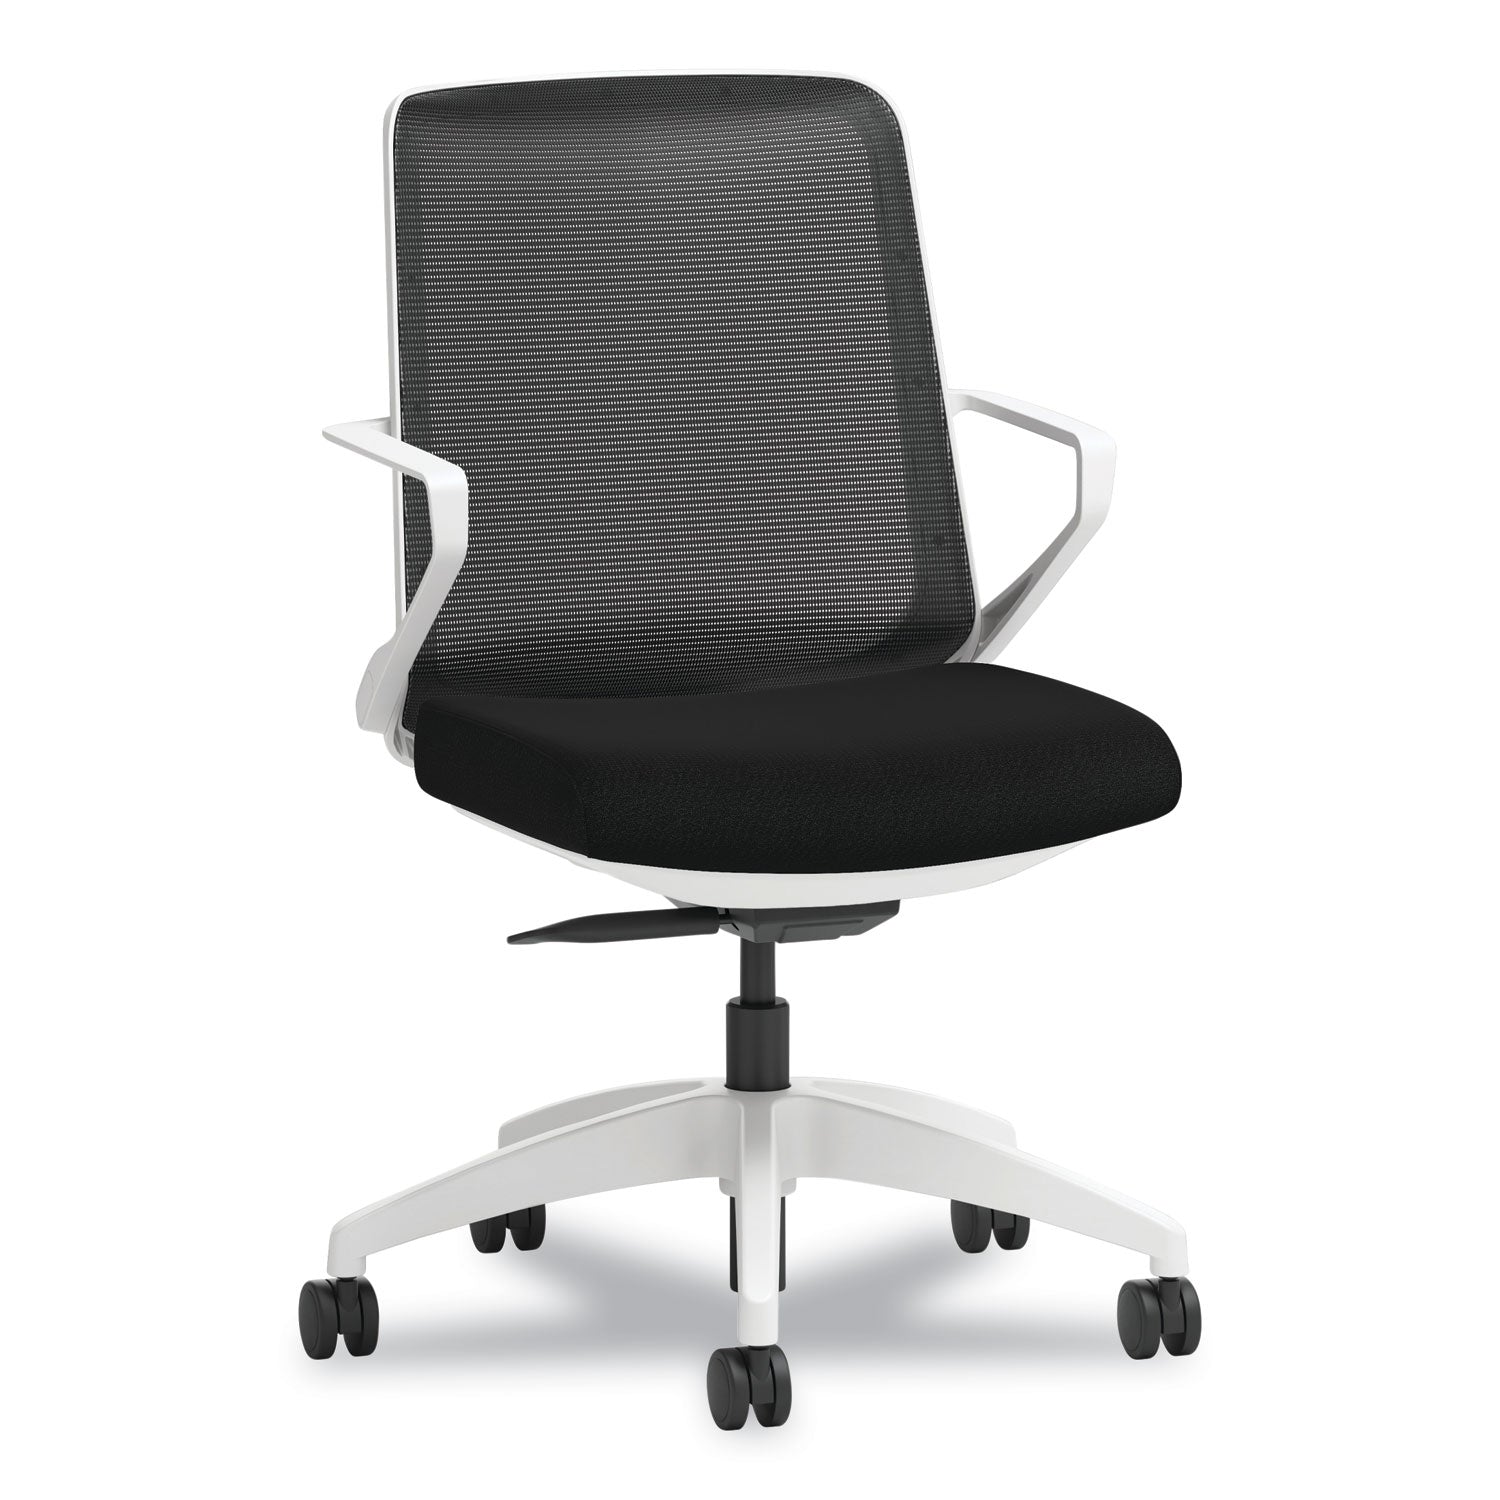 cliq-office-chair-supports-up-to-300-lb-17-to-22-seat-height-black-seat-back-white-base-ships-in-7-10-business-days_honclqimcu10dw - 1